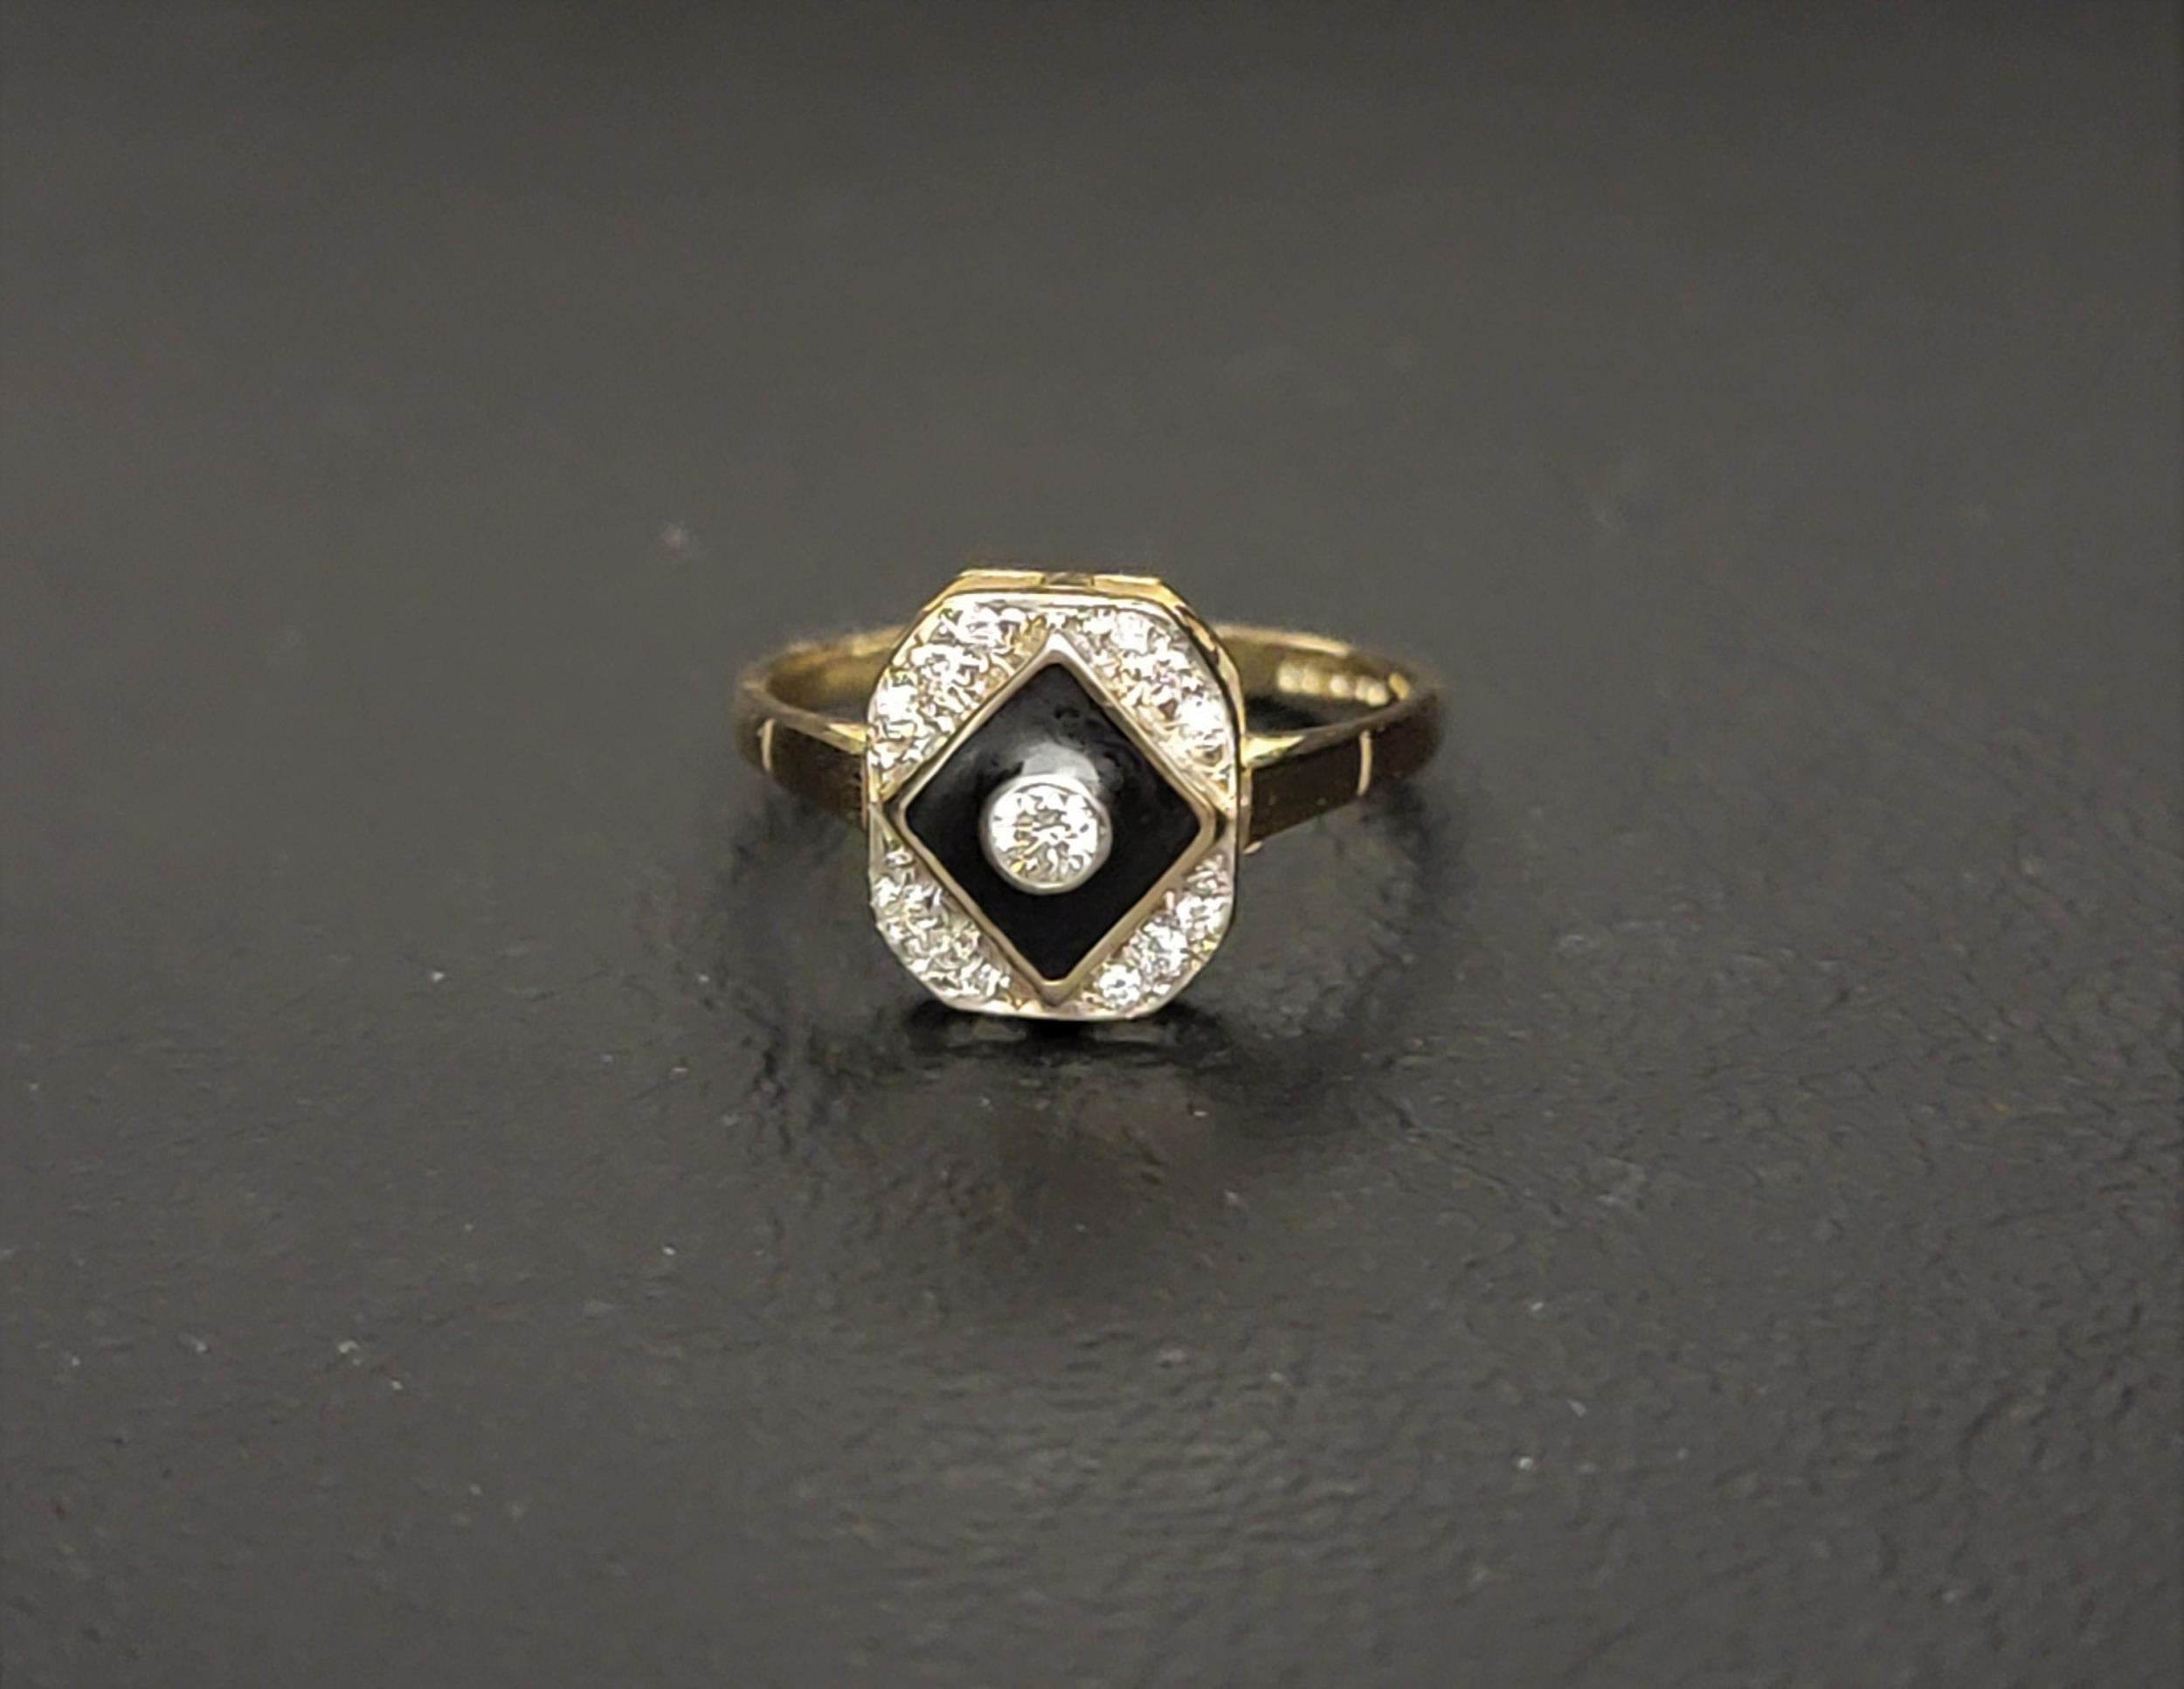 ART DECO STYLE ENAMEL AND DIAMOND RING the central bezel set diamond approximately 0.07cts in a